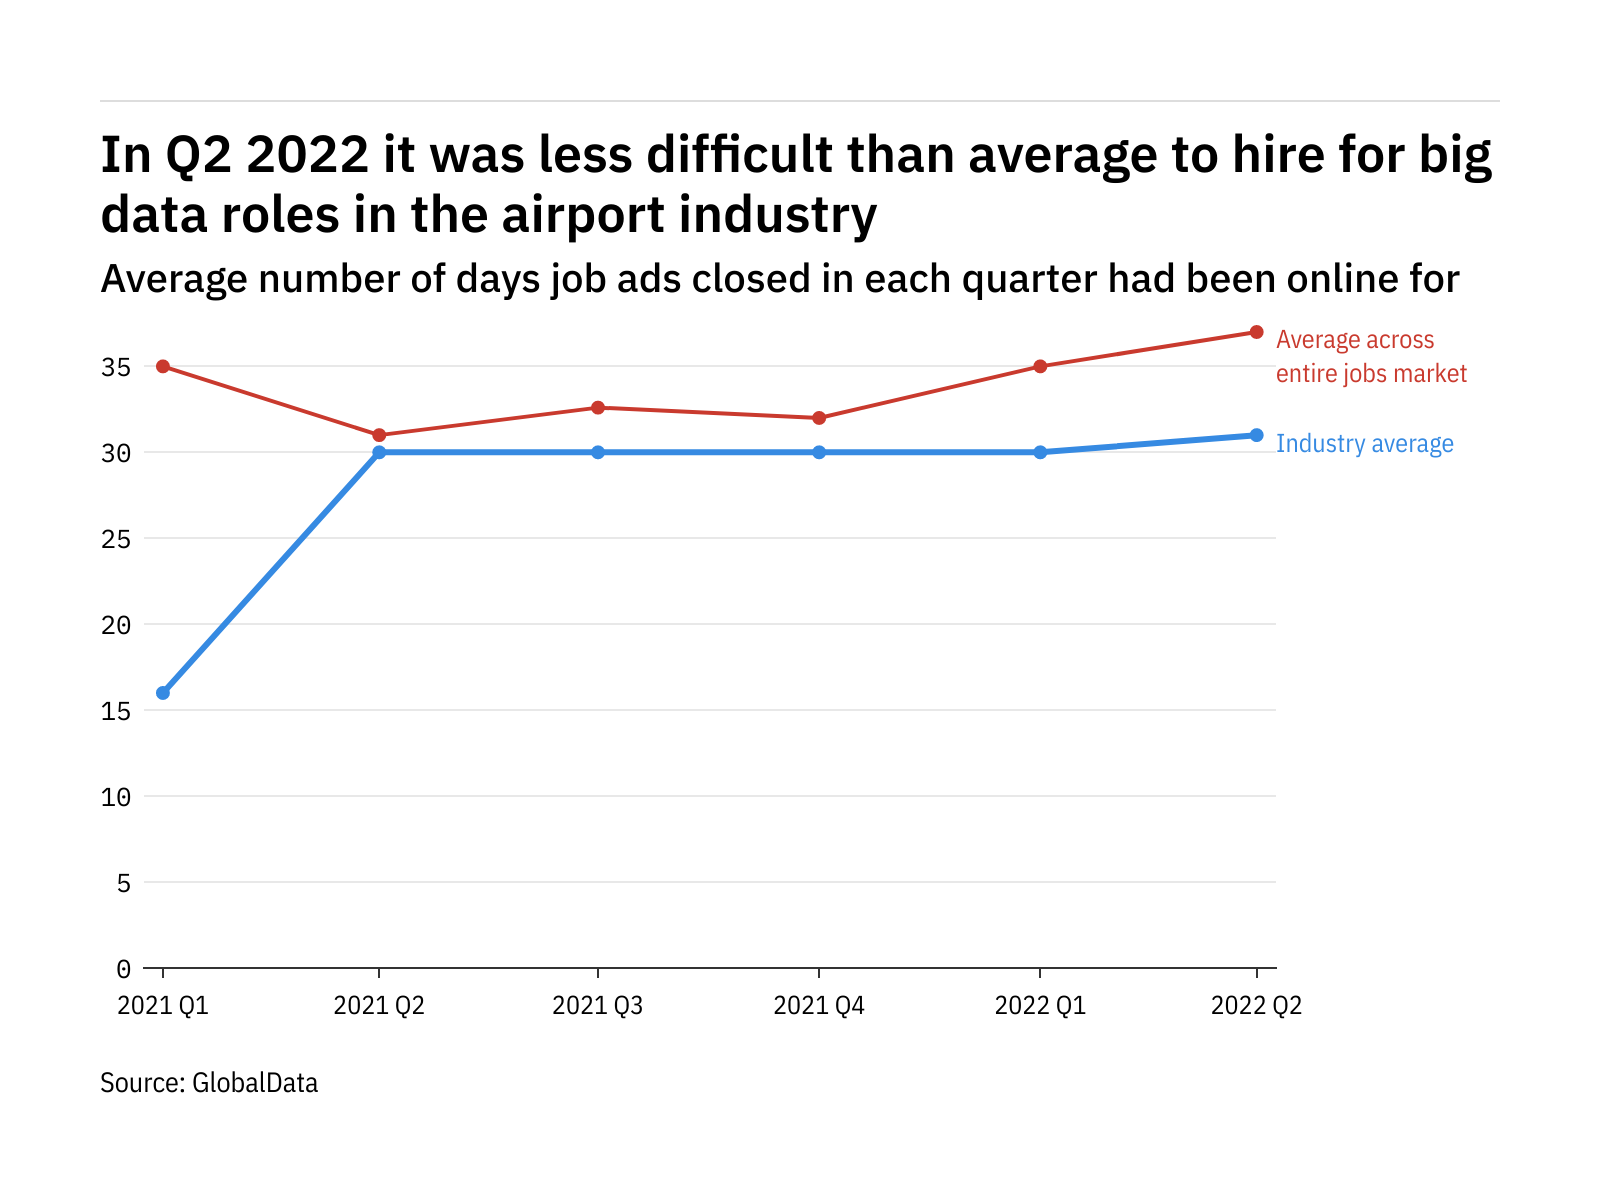 The airport industry found it harder to fill big data vacancies in Q2 2022